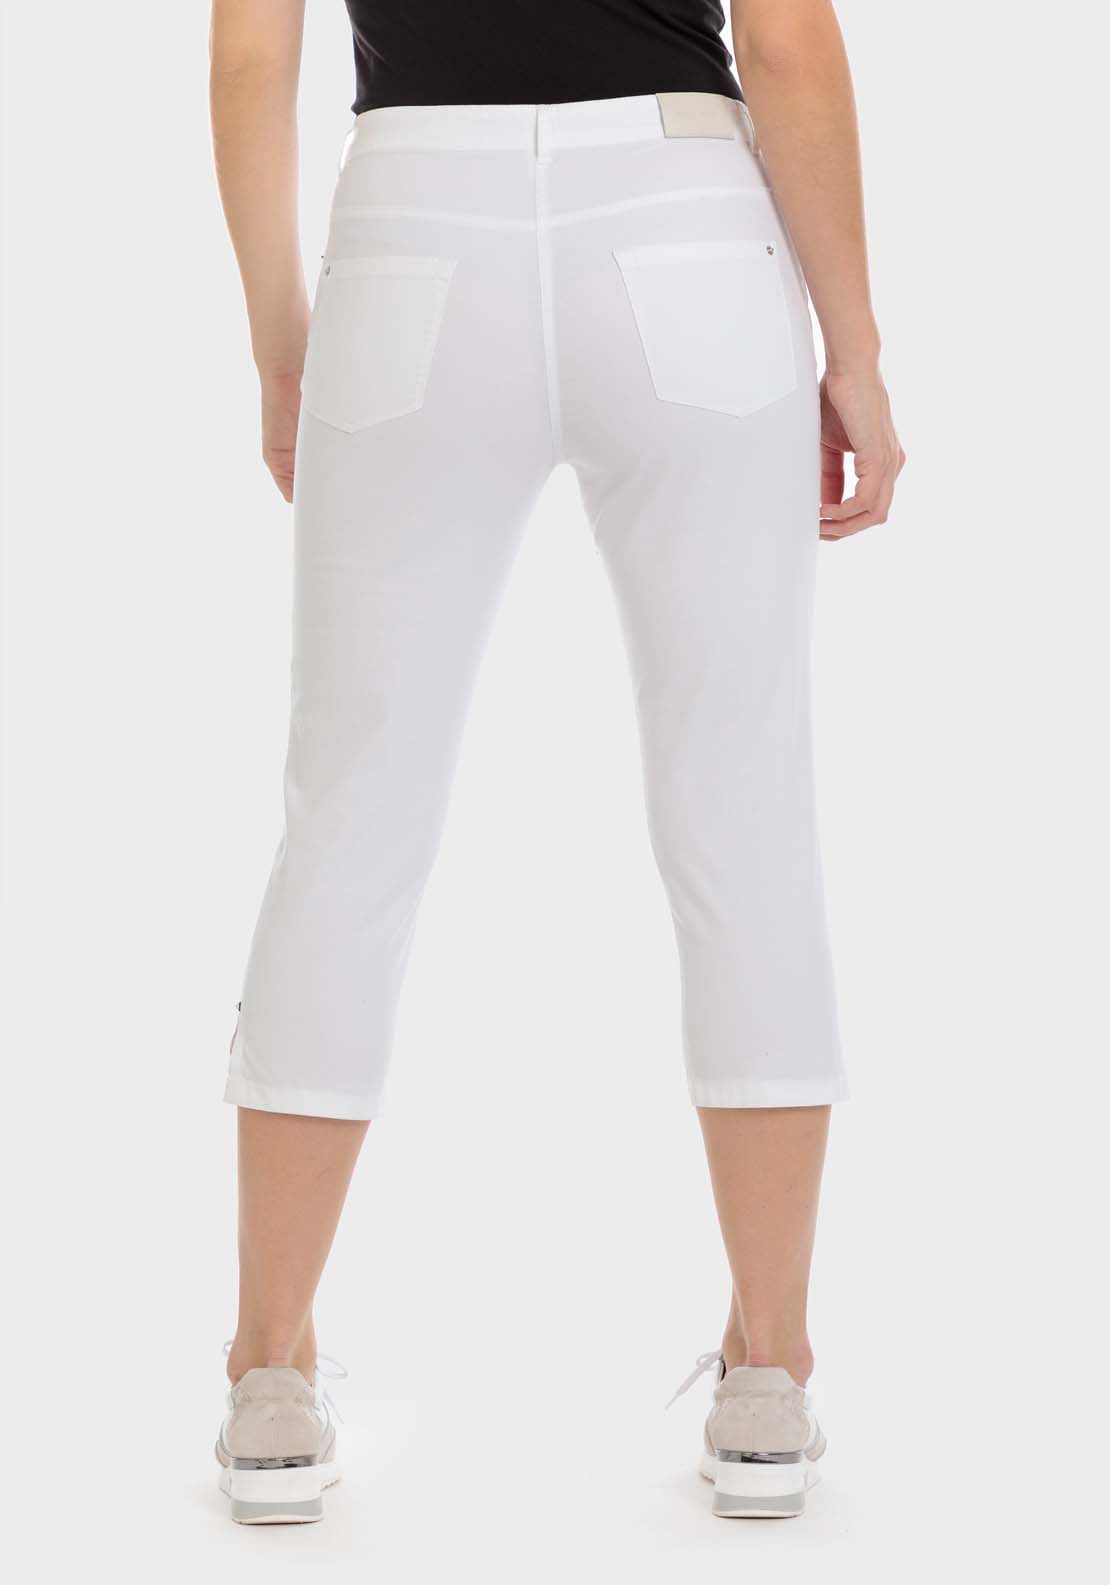 Punt Roma Cotton Crop Trousers - White 2 Shaws Department Stores